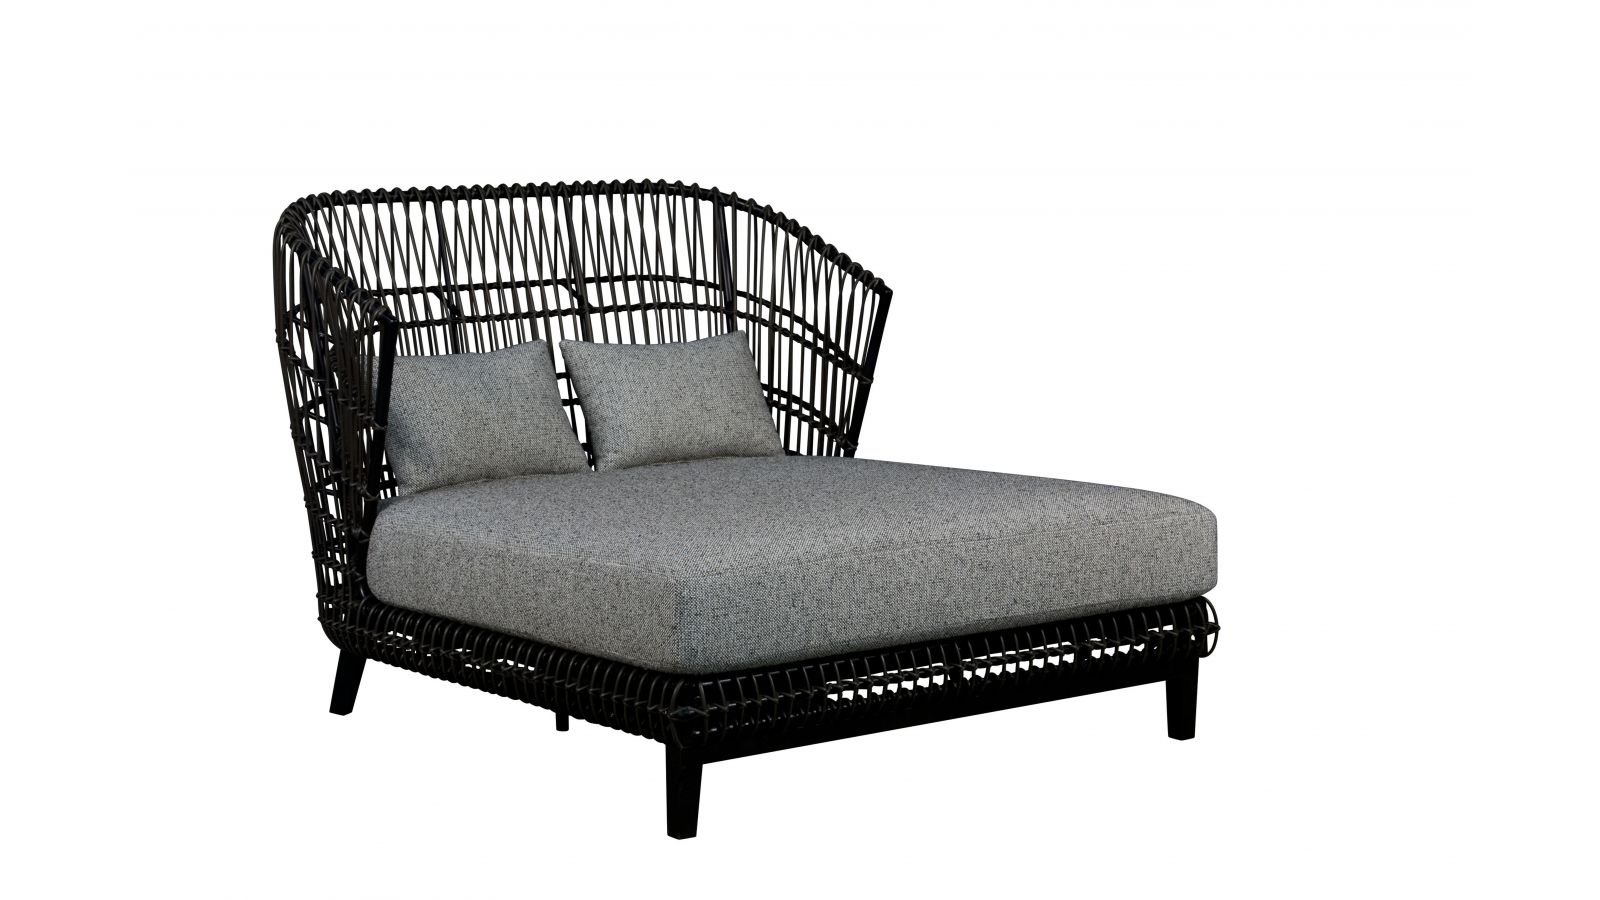 Lilan Double Chaise Lounge